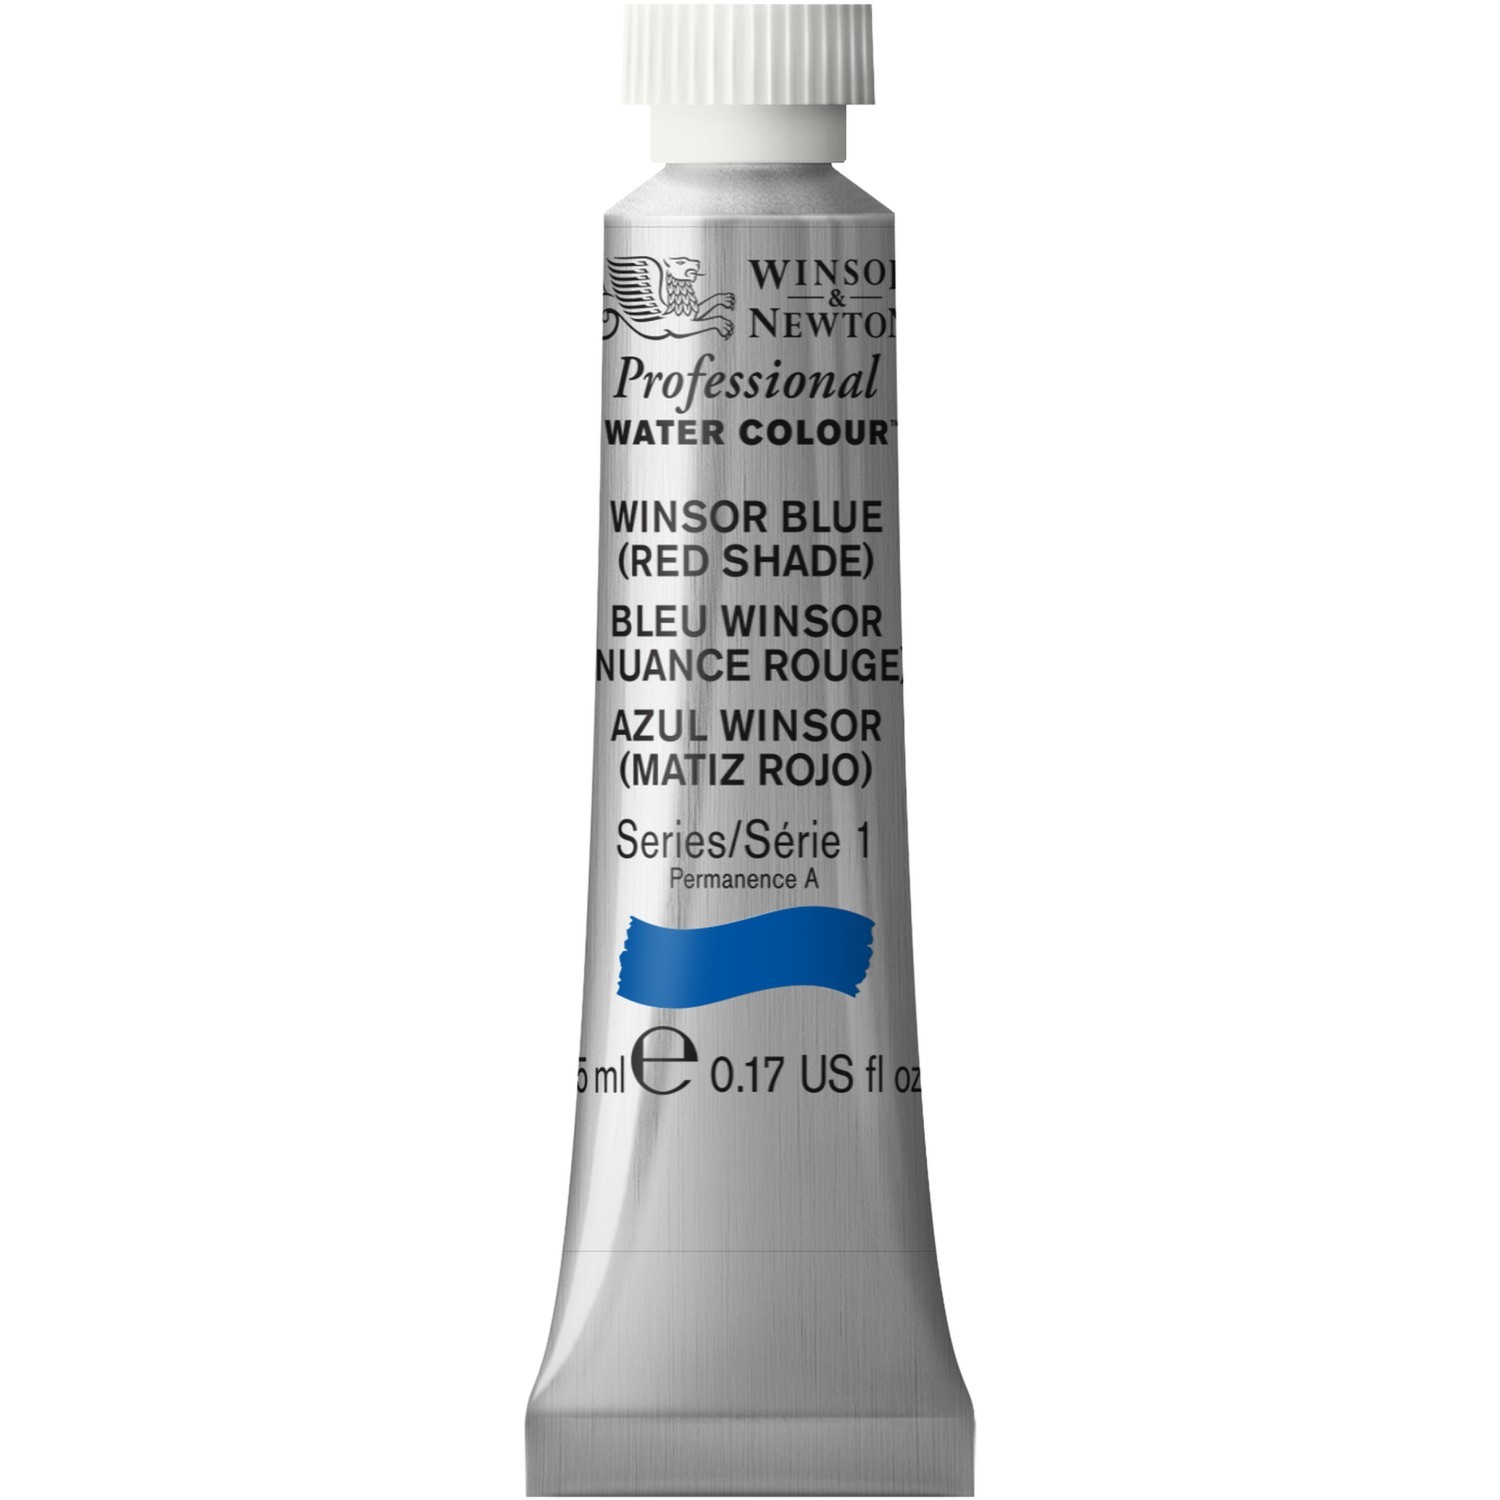 Winsor and Newton 5ml Professional Watercolour Paint - Winsor Blue Image 1